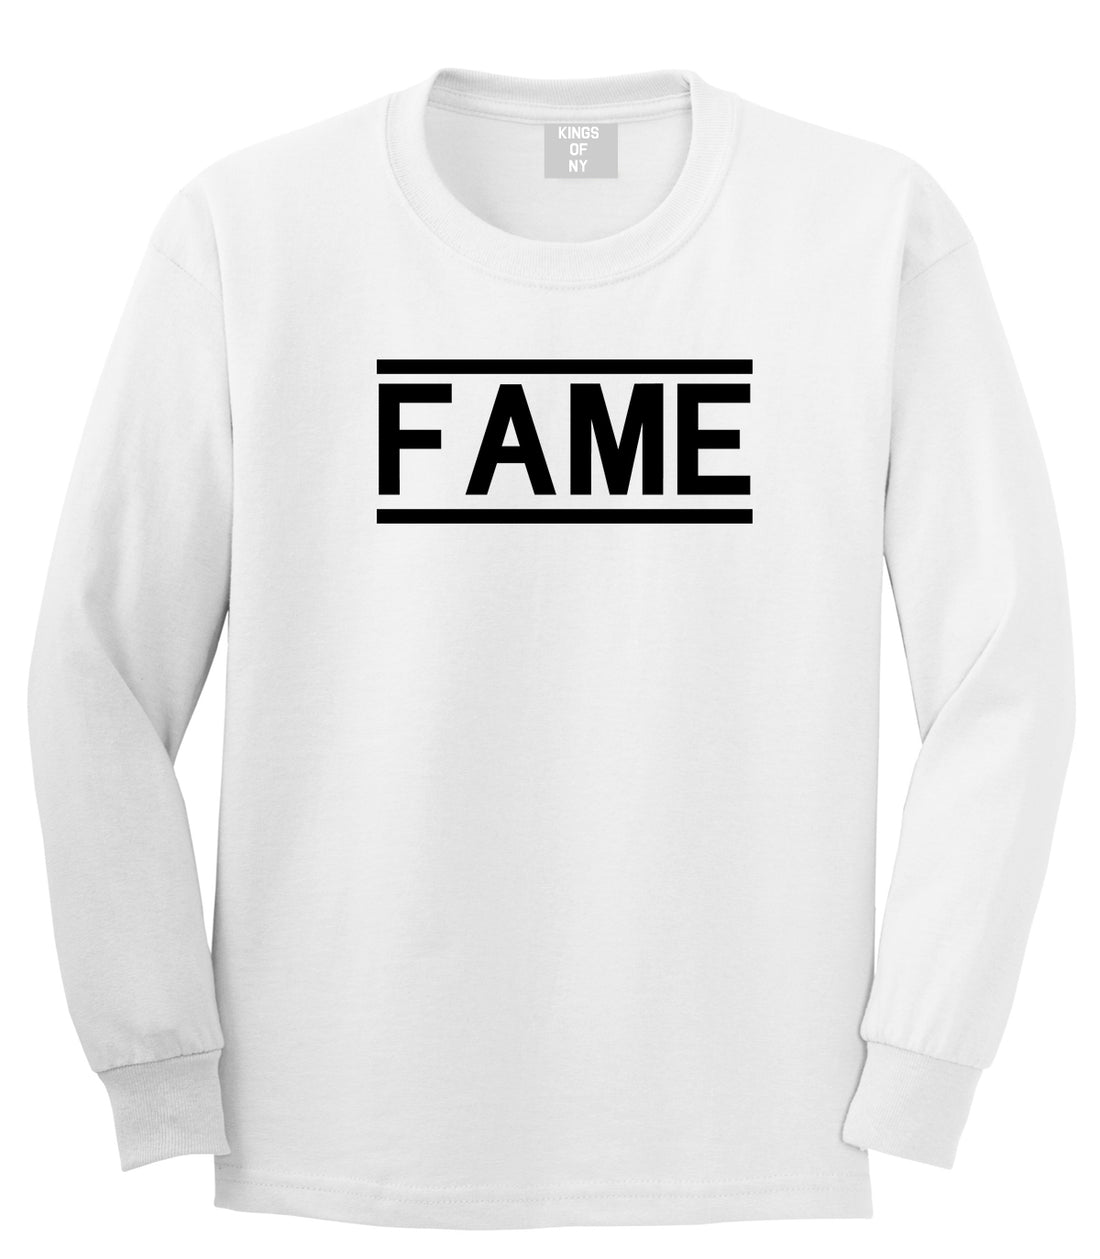 Fame Famous Mens White Long Sleeve T-Shirt by KINGS OF NY